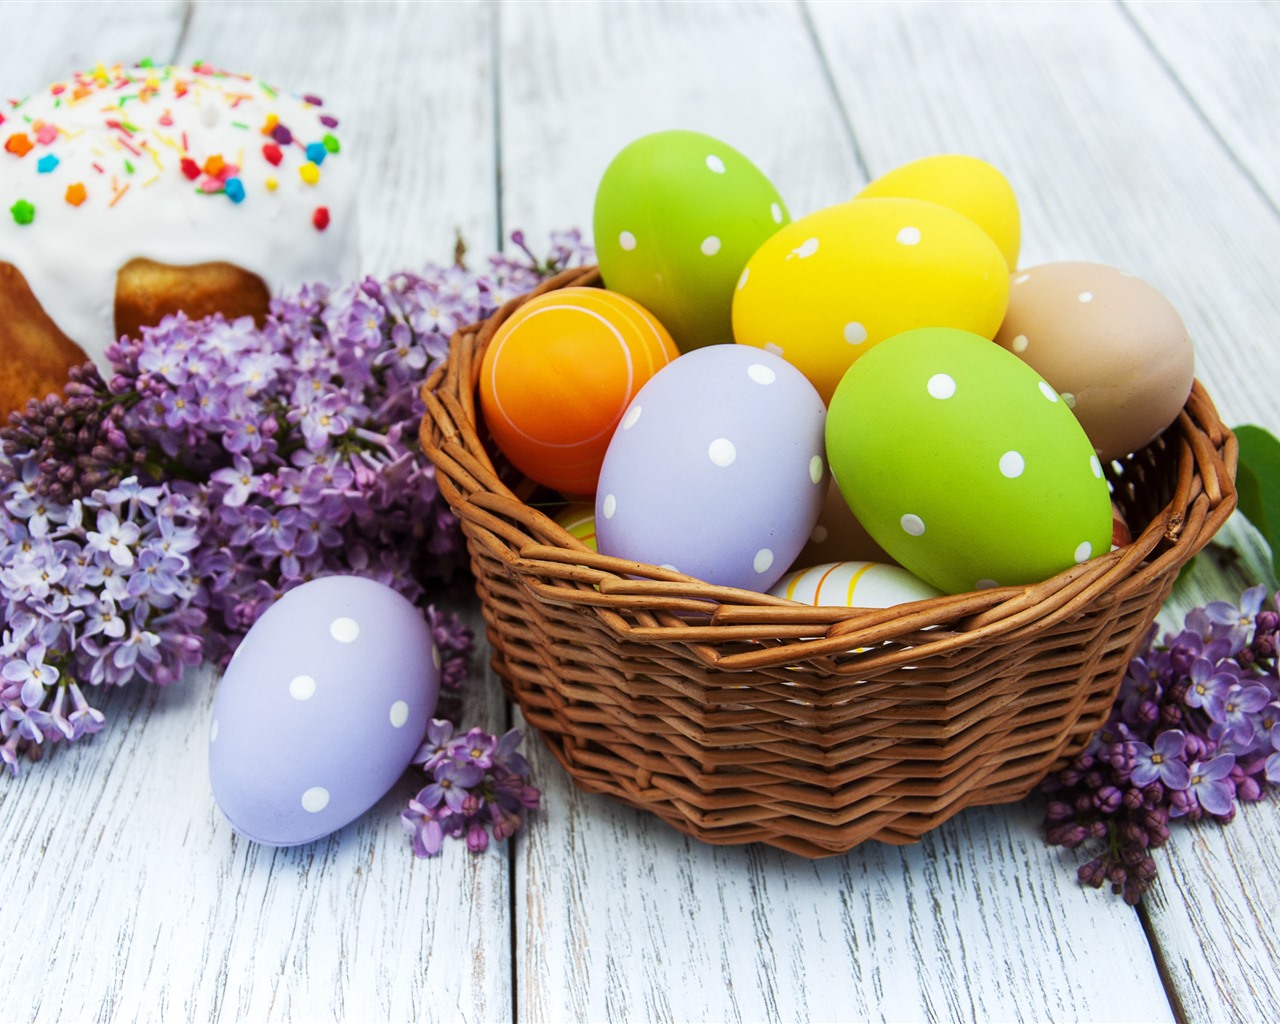 Wallpaper Easter eggs, lilac flowers, cake, basket 3840x2160 UHD 4K Picture, Image